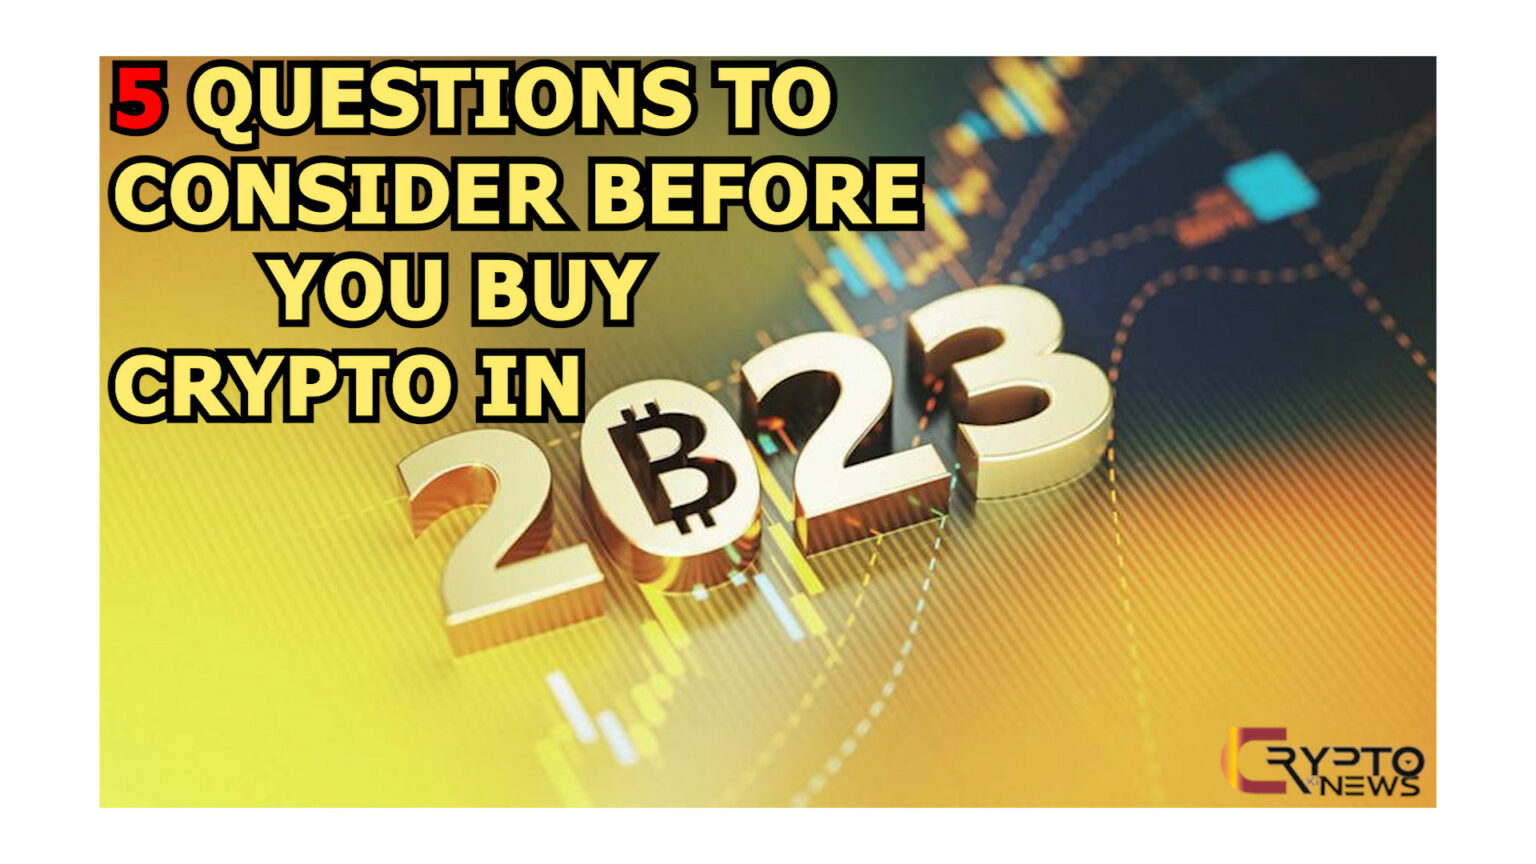 Ask Before Investing in Crypto